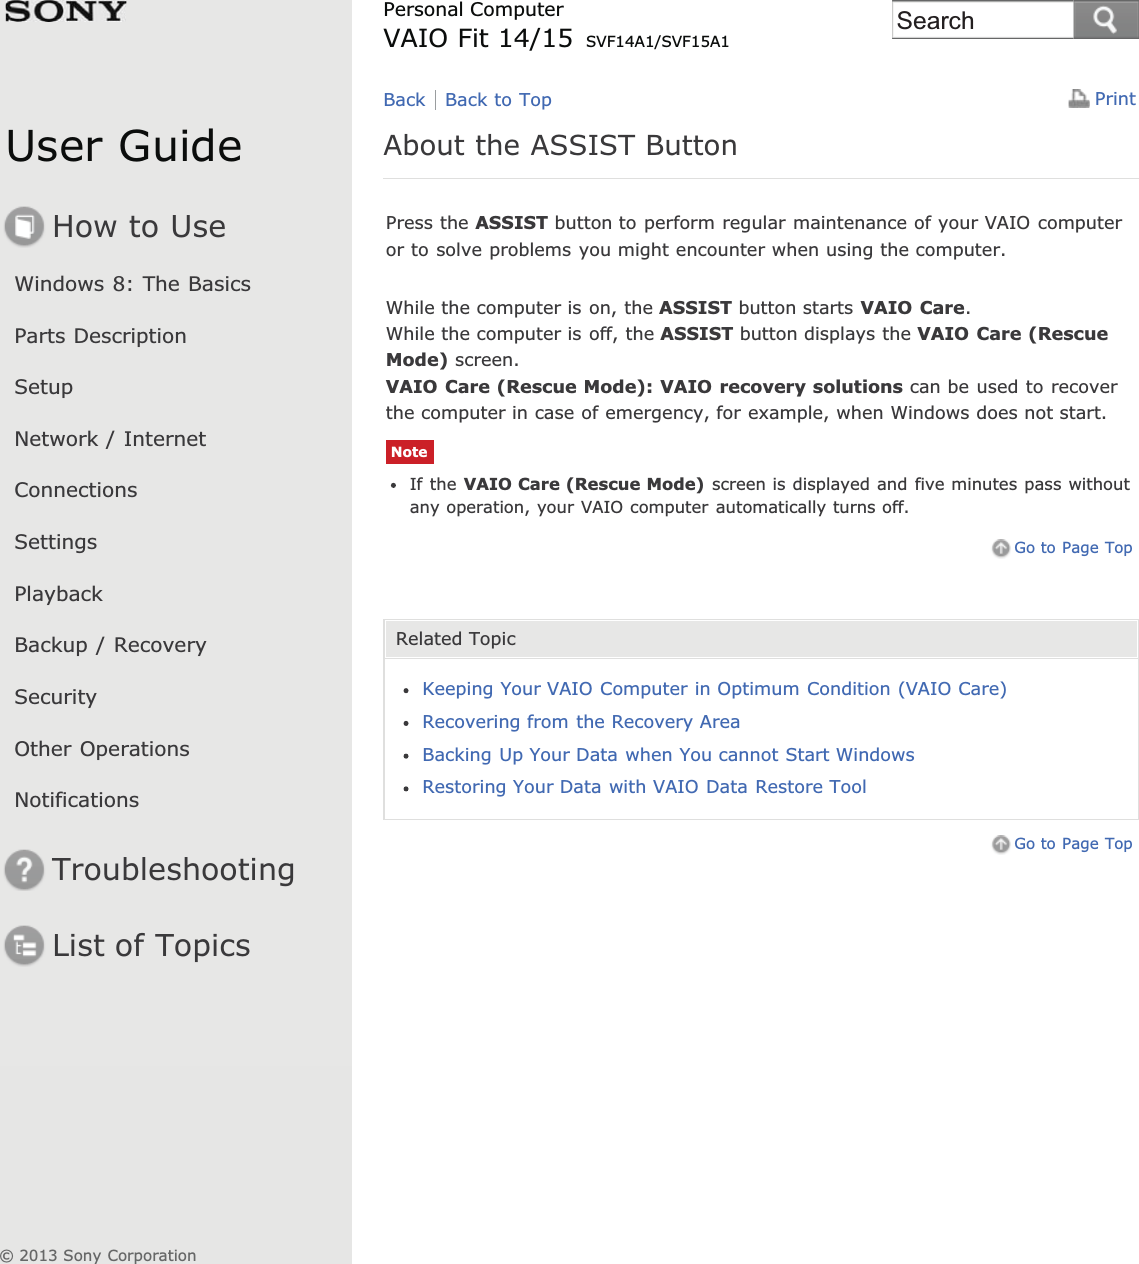 User GuideHow to UseWindows 8: The BasicsParts DescriptionSetupNetwork / InternetConnectionsSettingsPlaybackBackup / RecoverySecurityOther OperationsNotificationsTroubleshootingList of TopicsPrintPersonal ComputerVAIO Fit 14/15 SVF14A1/SVF15A1About the ASSIST ButtonPress the ASSIST button to perform regular maintenance of your VAIO computeror to solve problems you might encounter when using the computer.While the computer is on, the ASSIST button starts VAIO Care.While the computer is off, the ASSIST button displays the VAIO Care (RescueMode) screen.VAIO Care (Rescue Mode): VAIO recovery solutions can be used to recoverthe computer in case of emergency, for example, when Windows does not start.NoteIf the VAIO Care (Rescue Mode) screen is displayed and five minutes pass withoutany operation, your VAIO computer automatically turns off.Go to Page TopRelated TopicKeeping Your VAIO Computer in Optimum Condition (VAIO Care)Recovering from the Recovery AreaBacking Up Your Data when You cannot Start WindowsRestoring Your Data with VAIO Data Restore ToolGo to Page TopBack Back to Top© 2013 Sony CorporationSearch